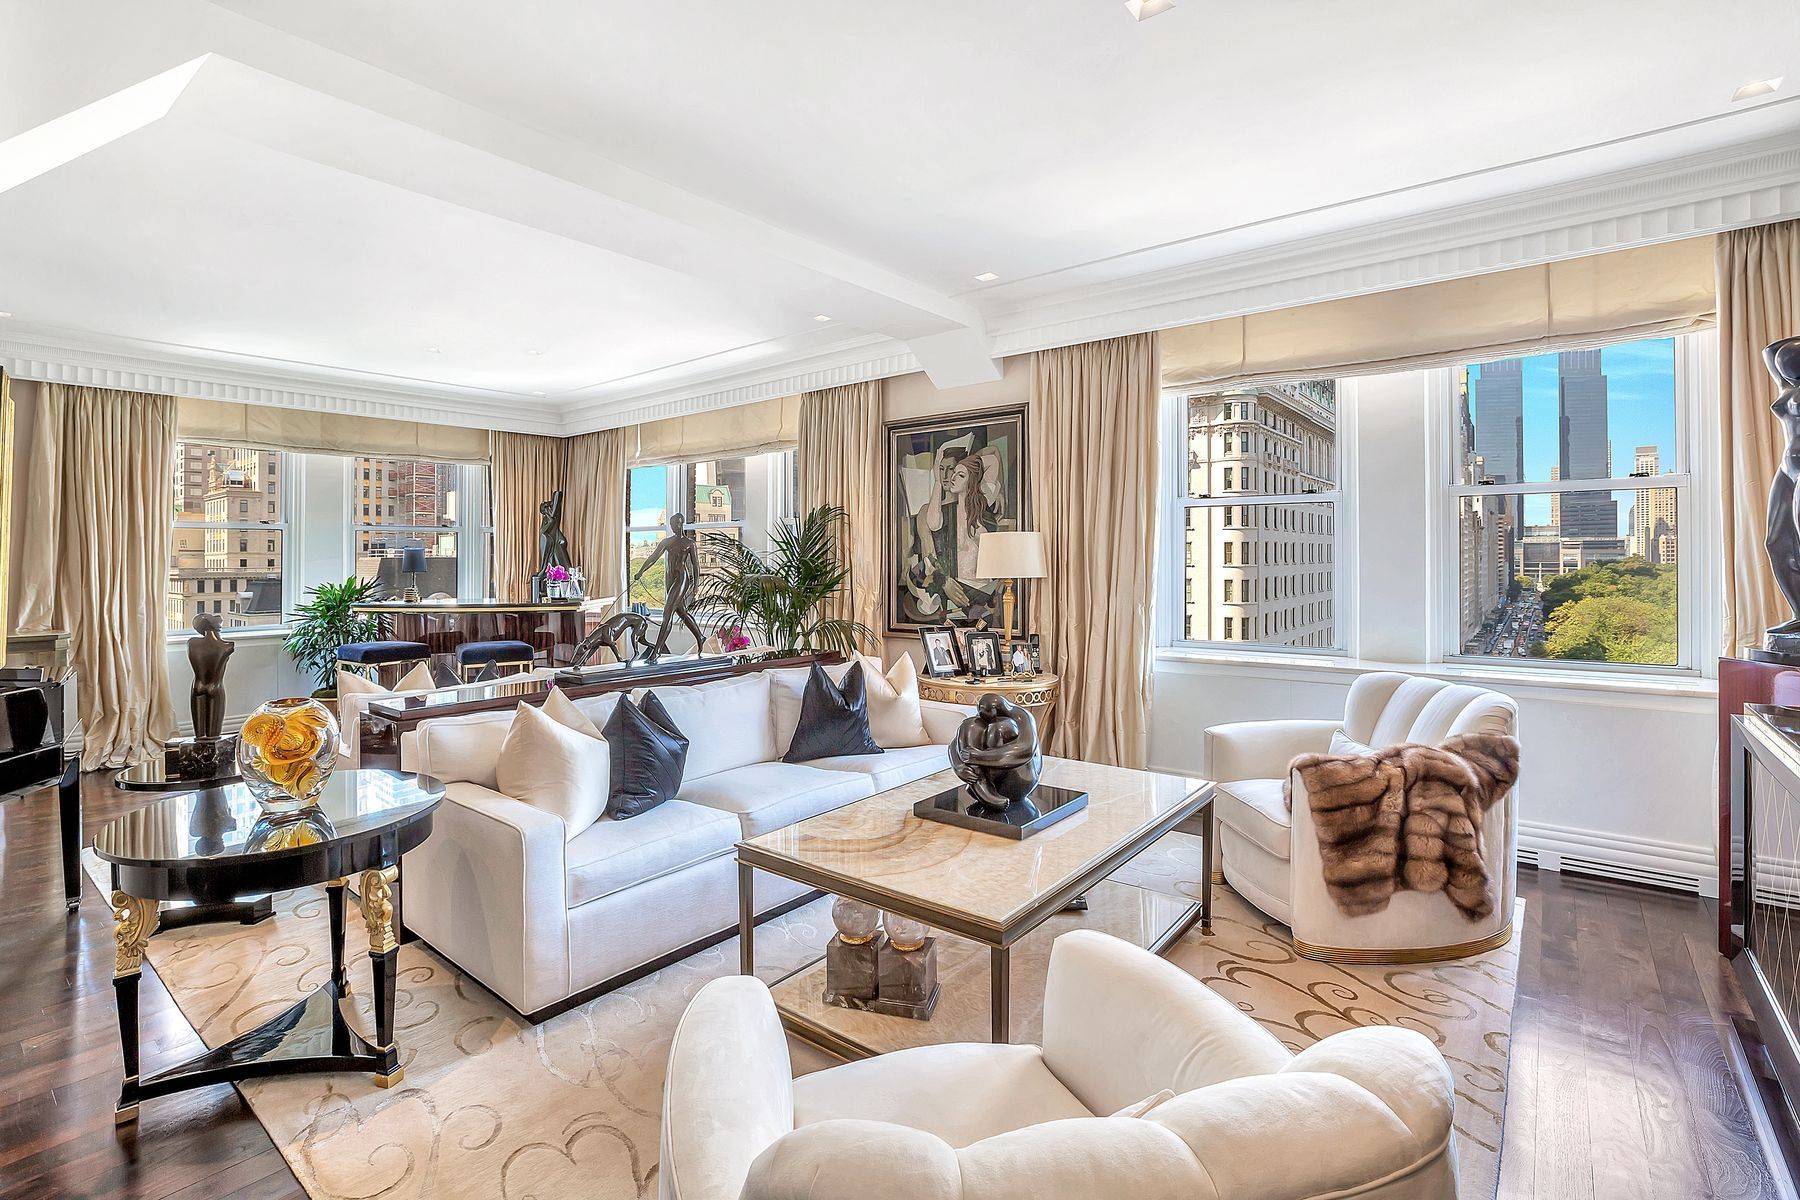 ART DECO MASTERPIECE WITH SPECTACULAR PARK AND CITY VIEWS This immense and pristine 2 Bedroom, 2 Bathroom plus 2 Powder Room Art Deco masterpiece recently received a multi million dollar, ...